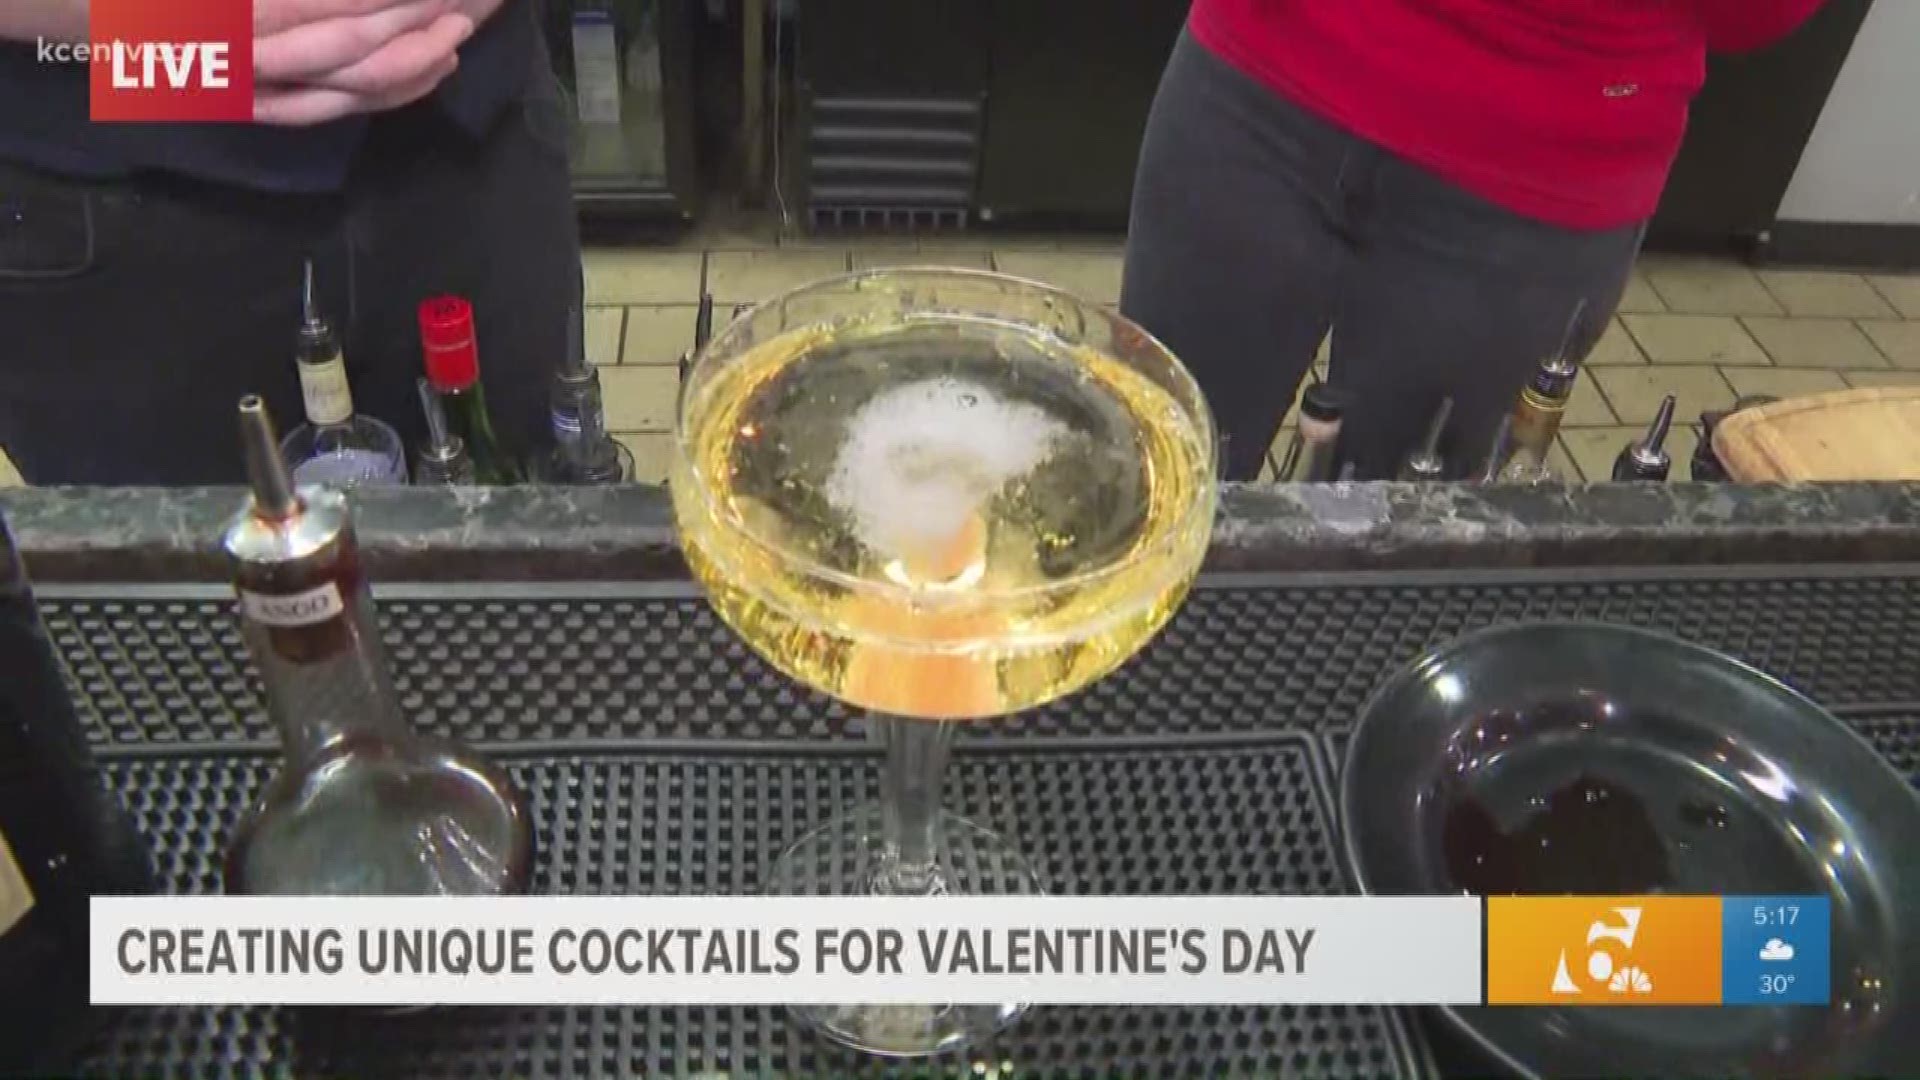 Cocktail recipes for Valentine's Day at Dichotomy Coffee & Spirits in Waco.